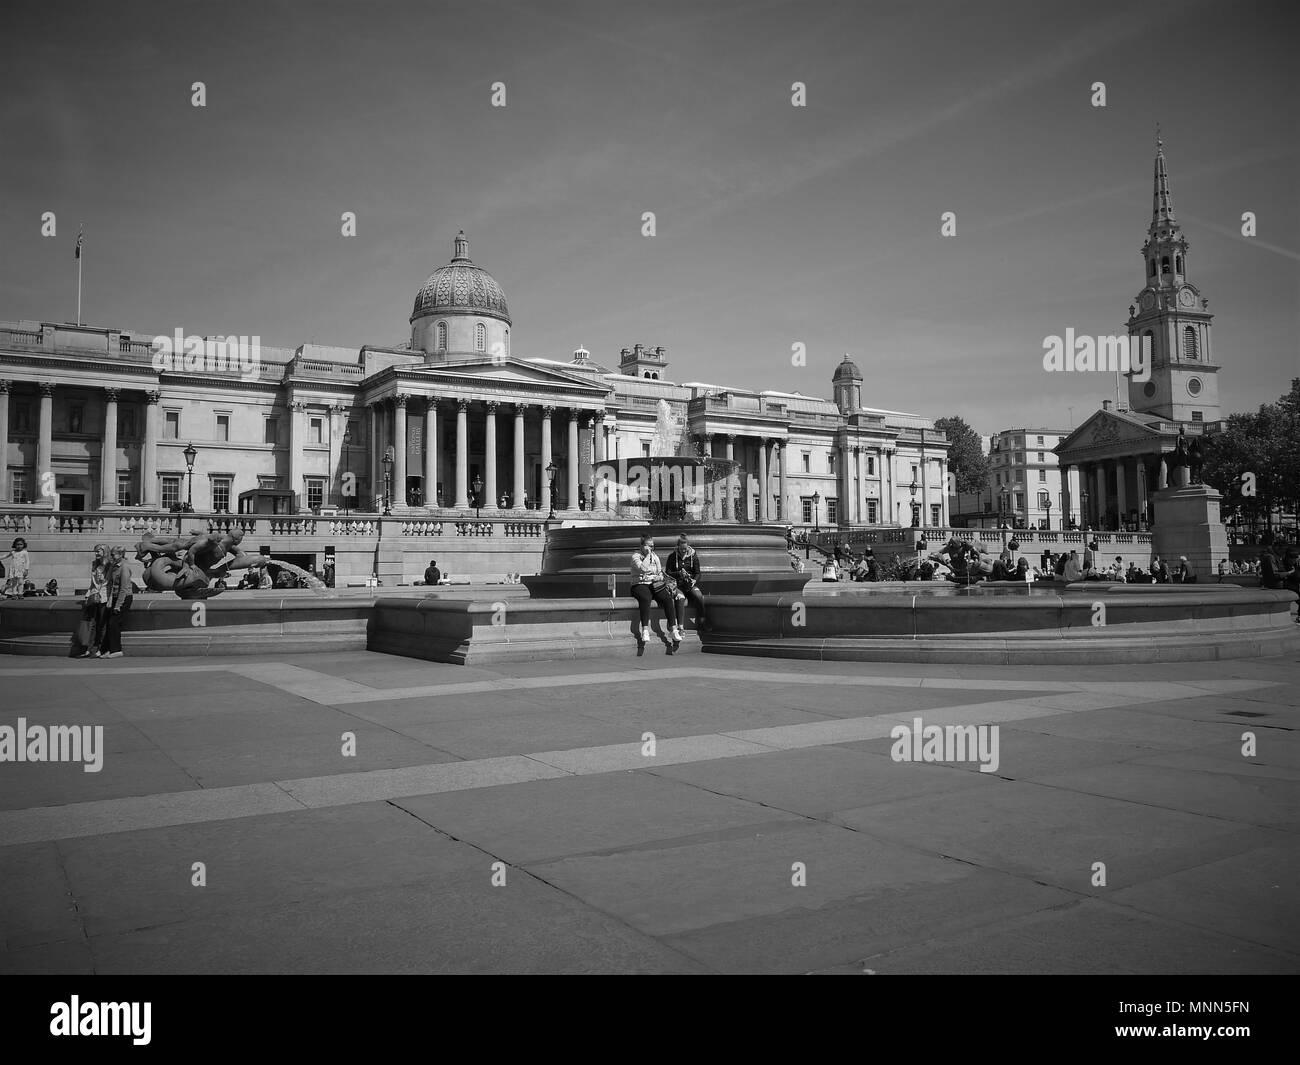 LONDON - MAY 18, 2018: ( Image digitally altered to monochrome ) Trafalgar Square and the iconic National Gallery behind Stock Photo